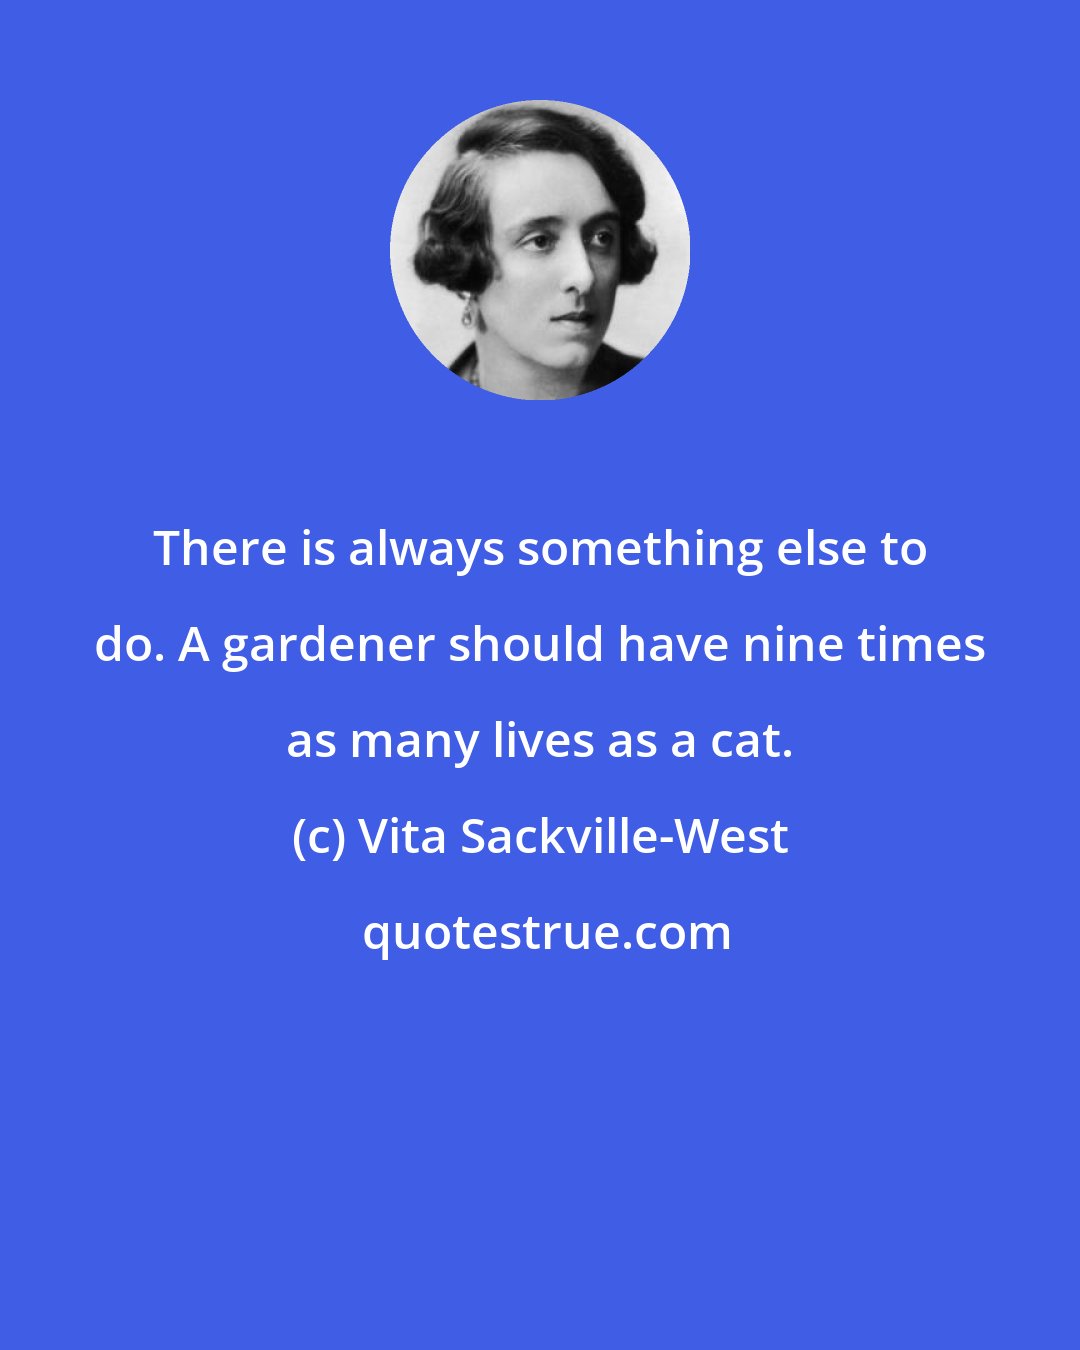 Vita Sackville-West: There is always something else to do. A gardener should have nine times as many lives as a cat.